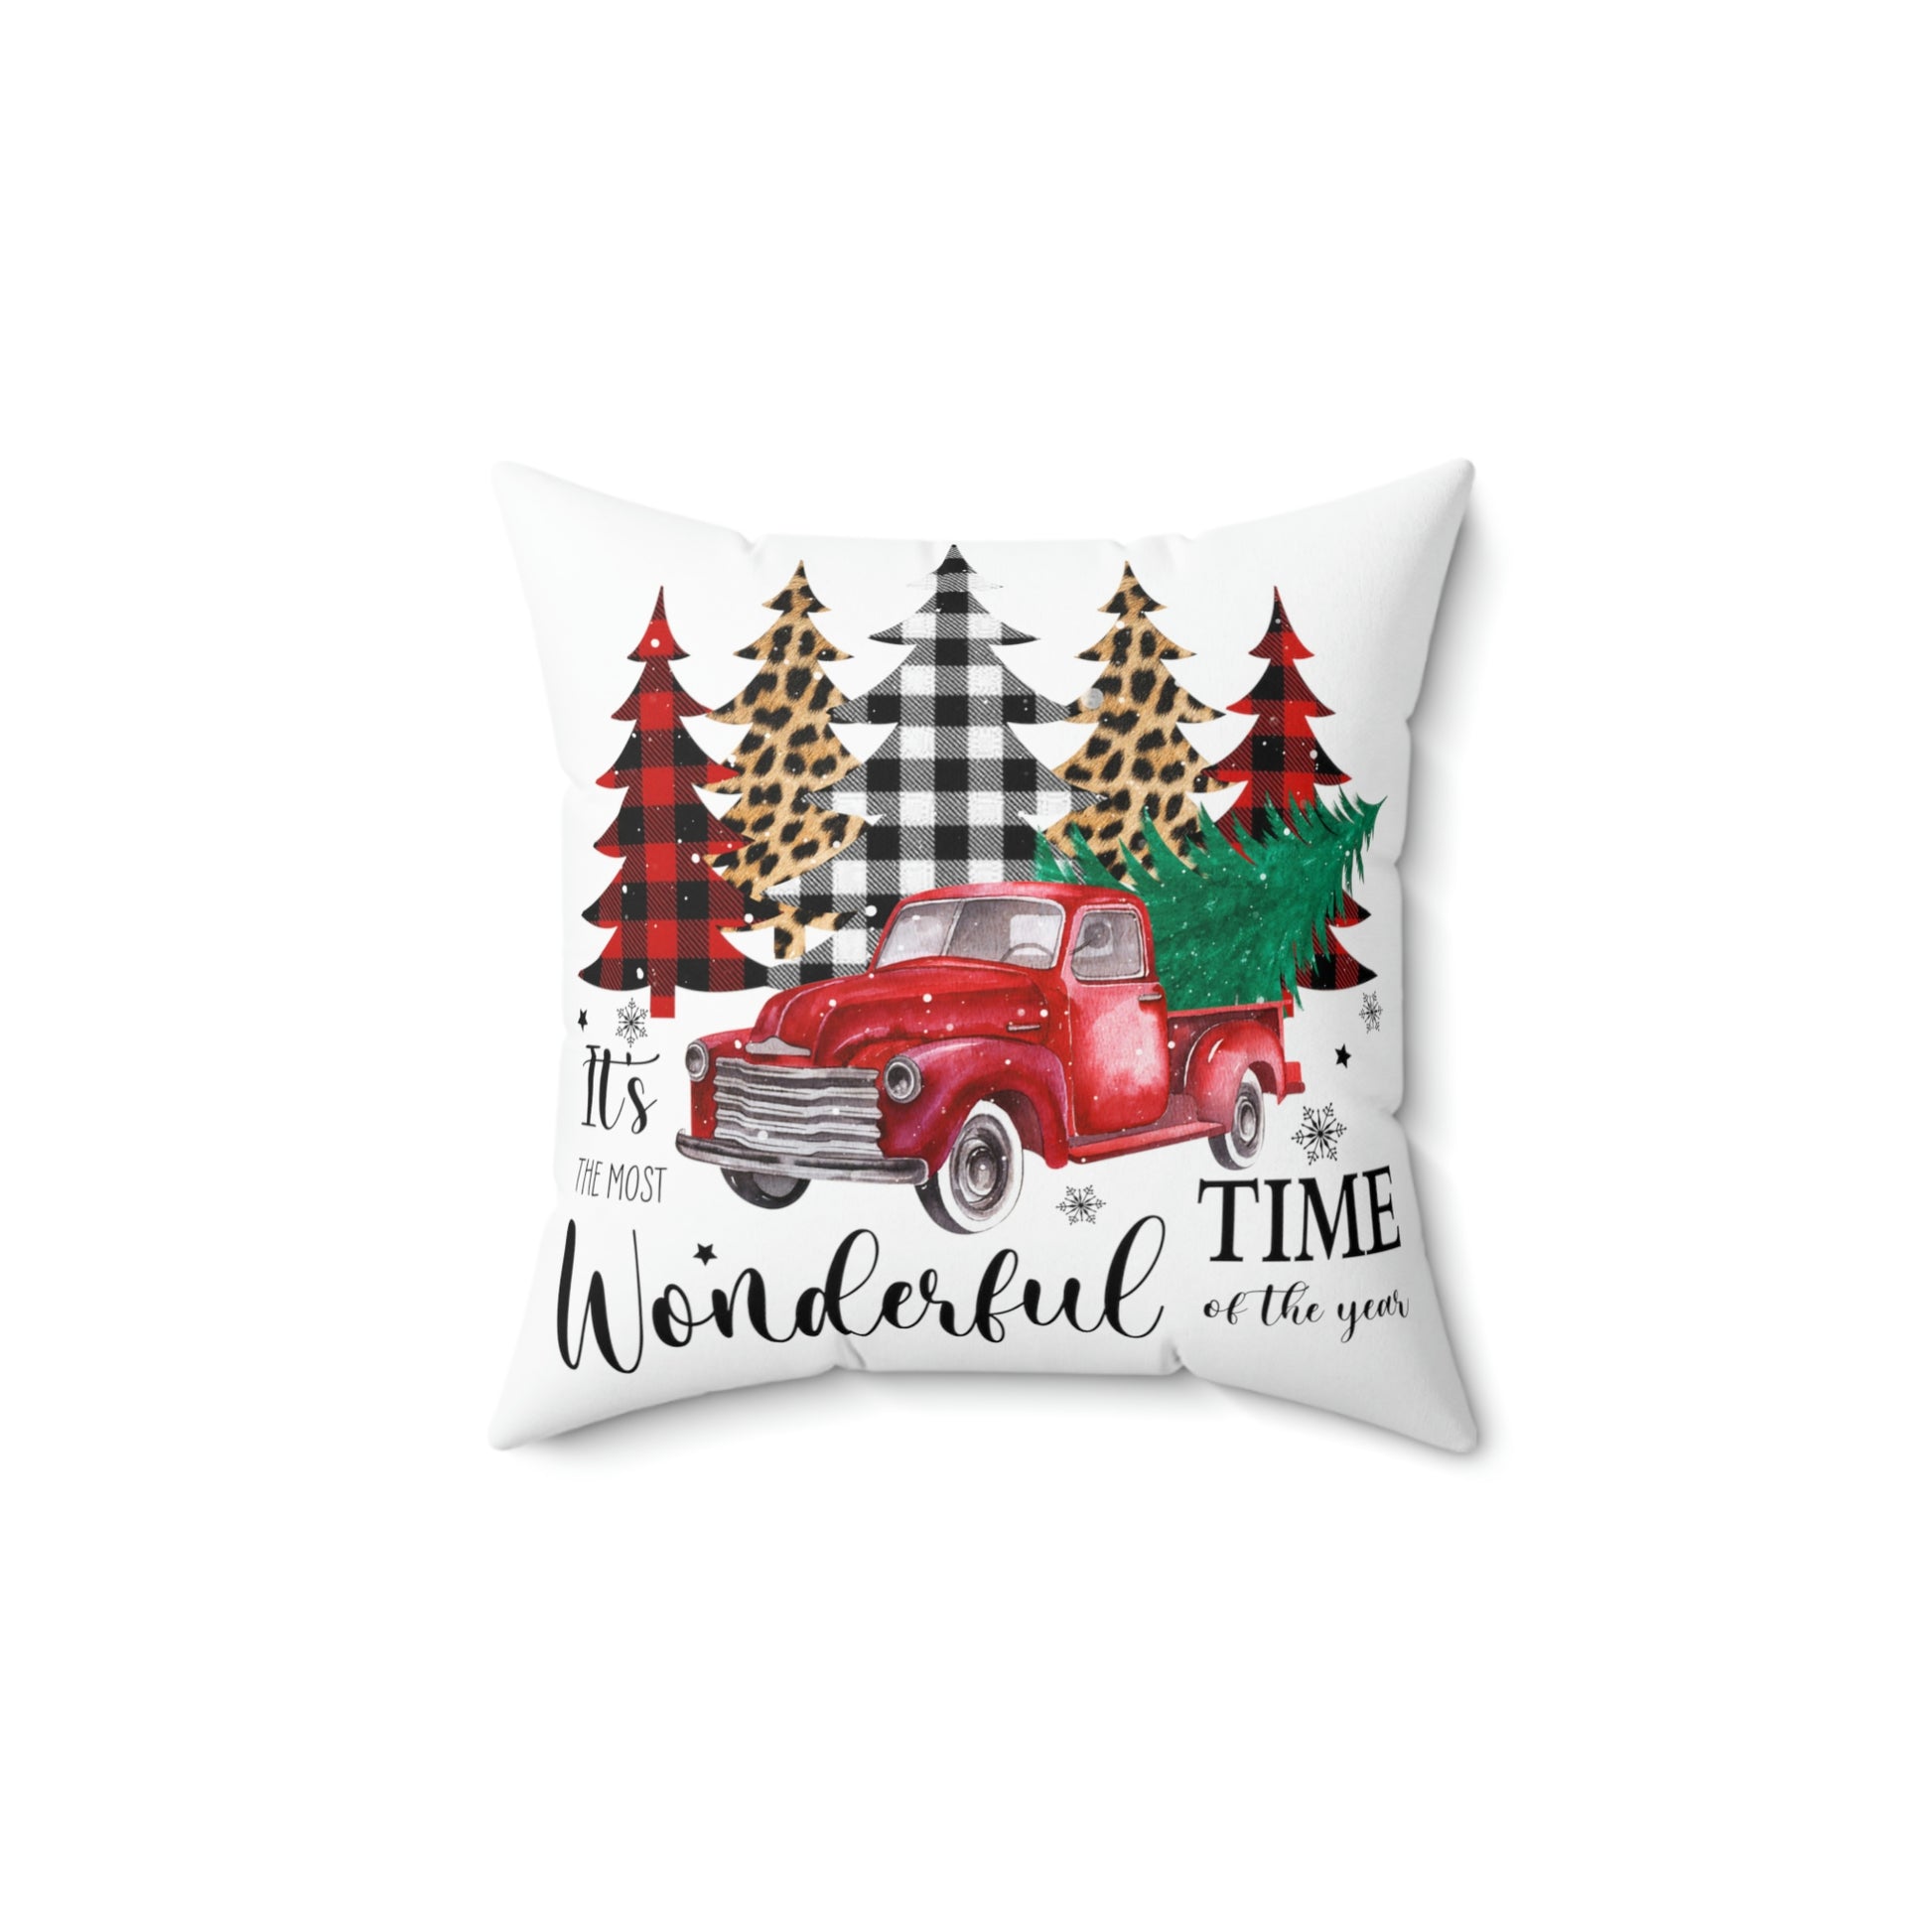 "It's The Most Wonderful Time Of The Year" Throw Pillow - Weave Got Gifts - Unique Gifts You Won’t Find Anywhere Else!